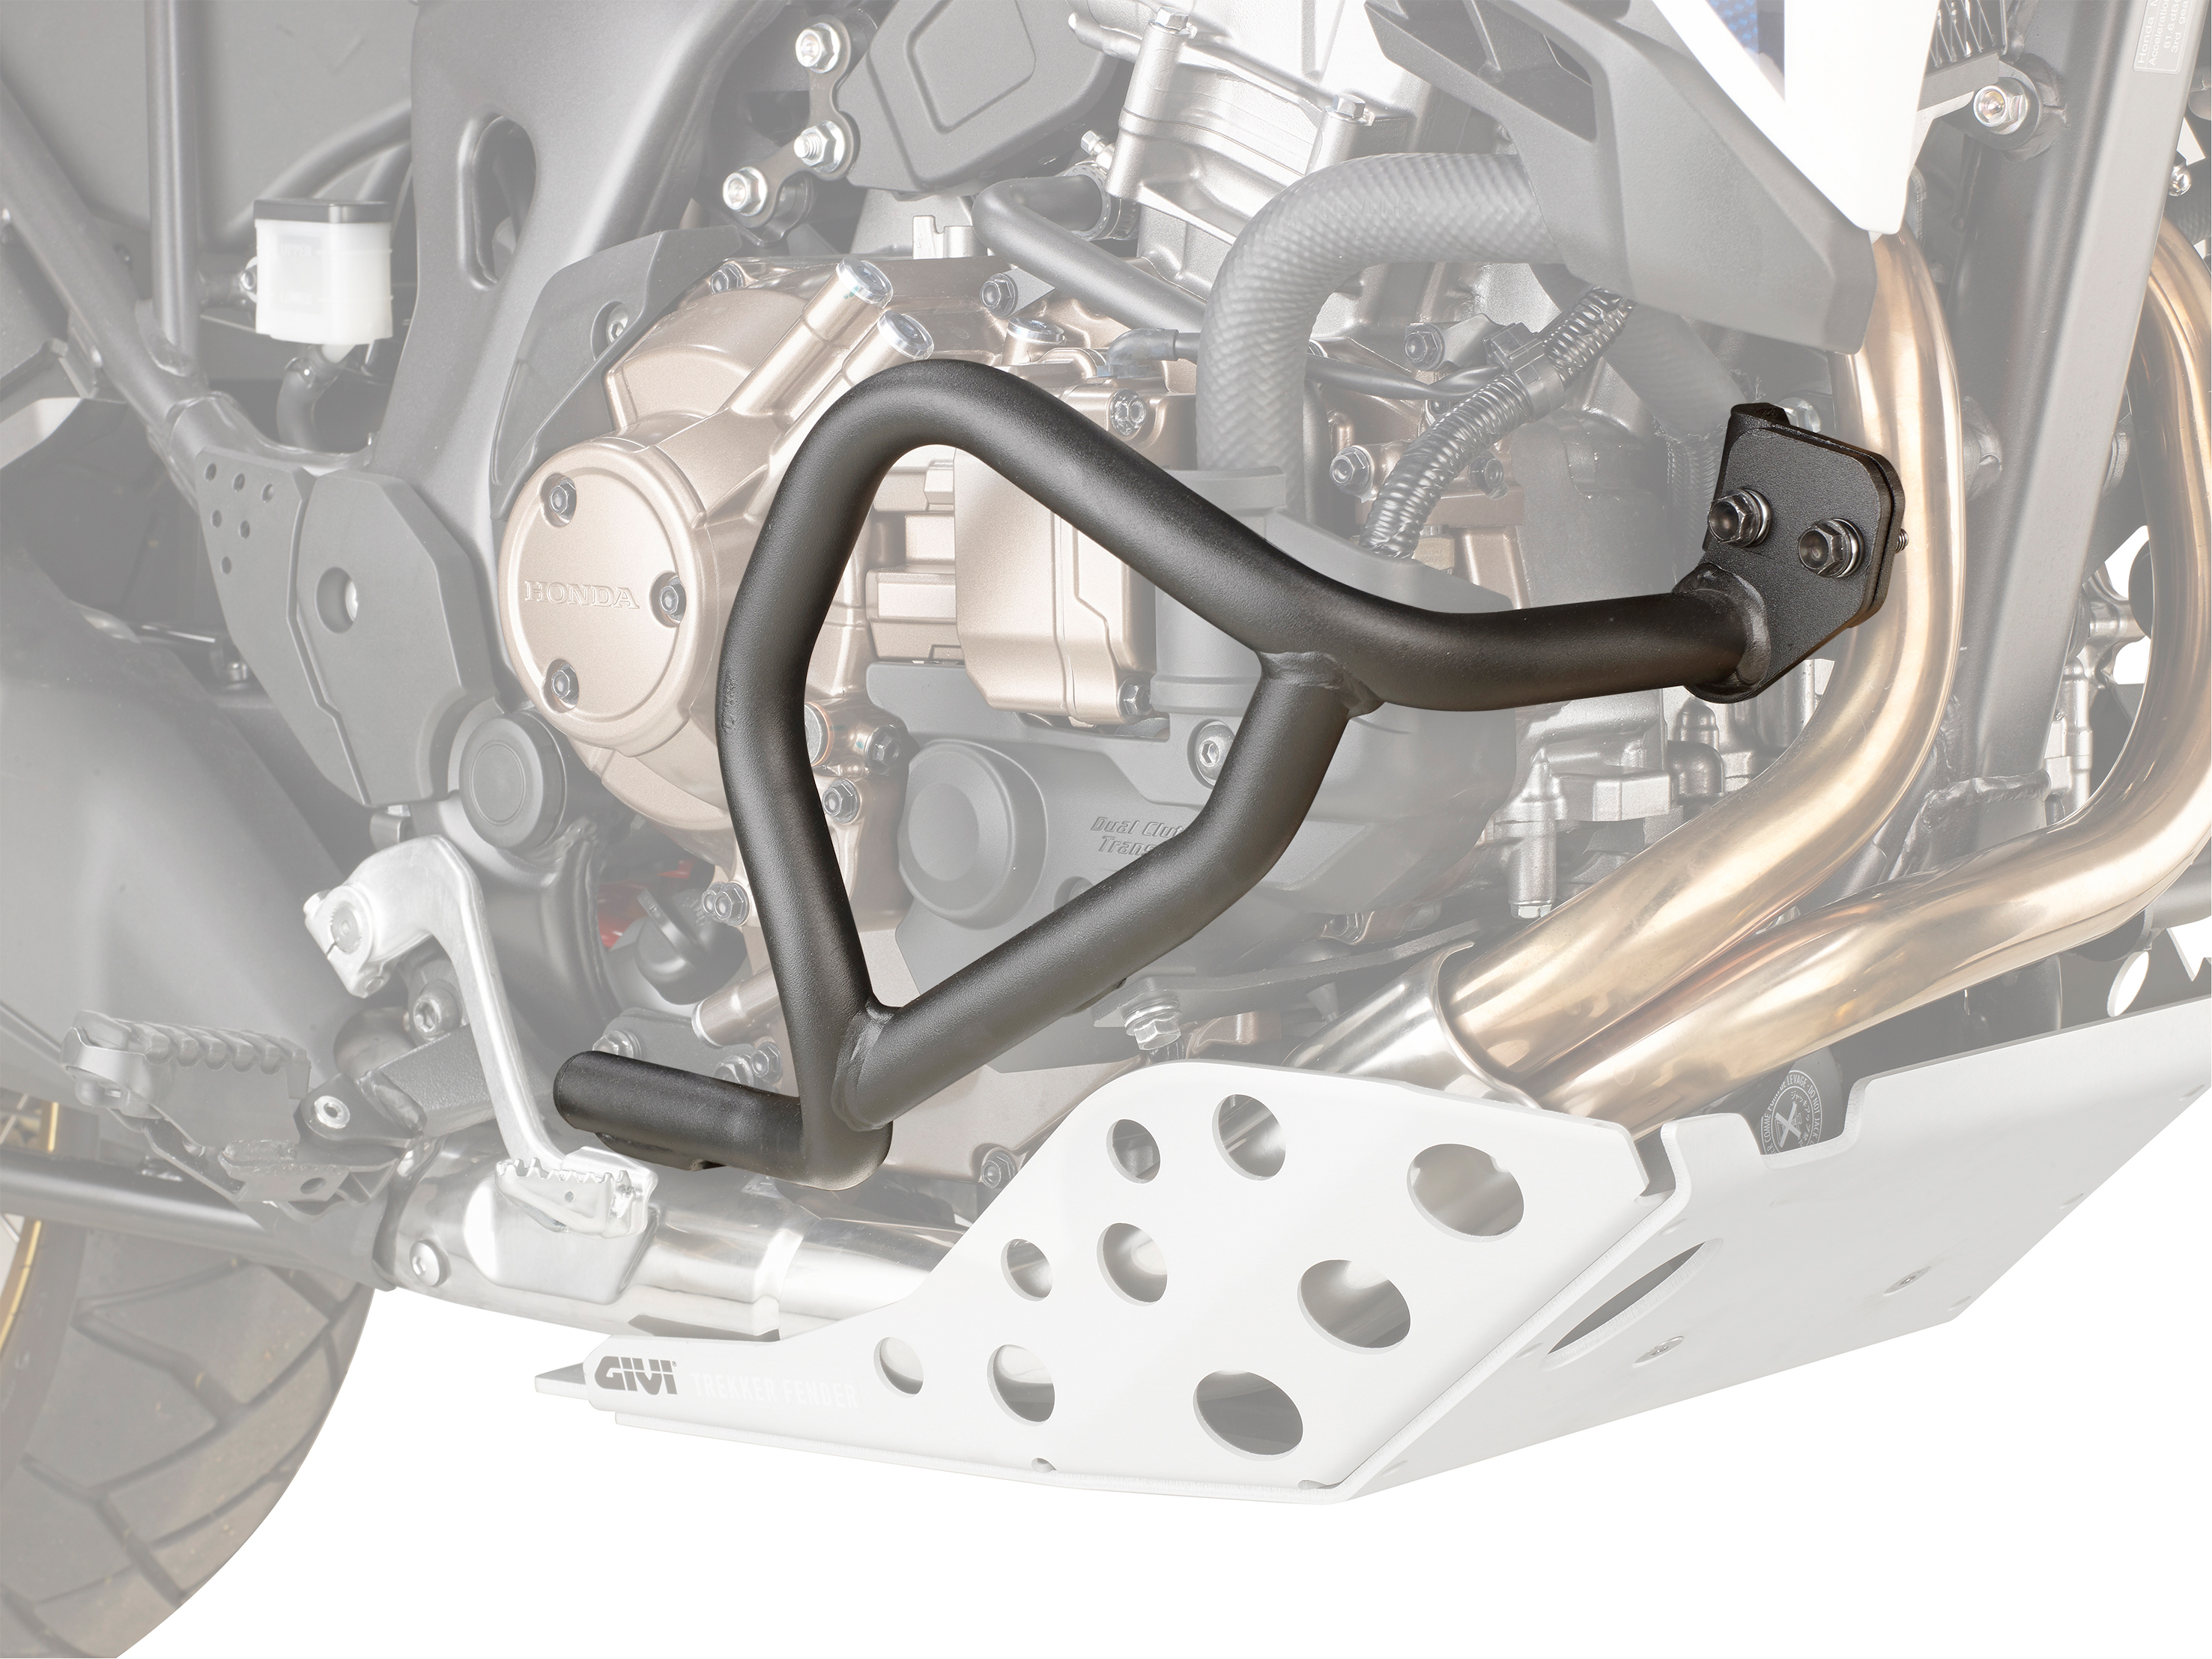 Black Lower Engine Guard - For 16-19 Honda CRF1000L Africa Twin DCT - Click Image to Close